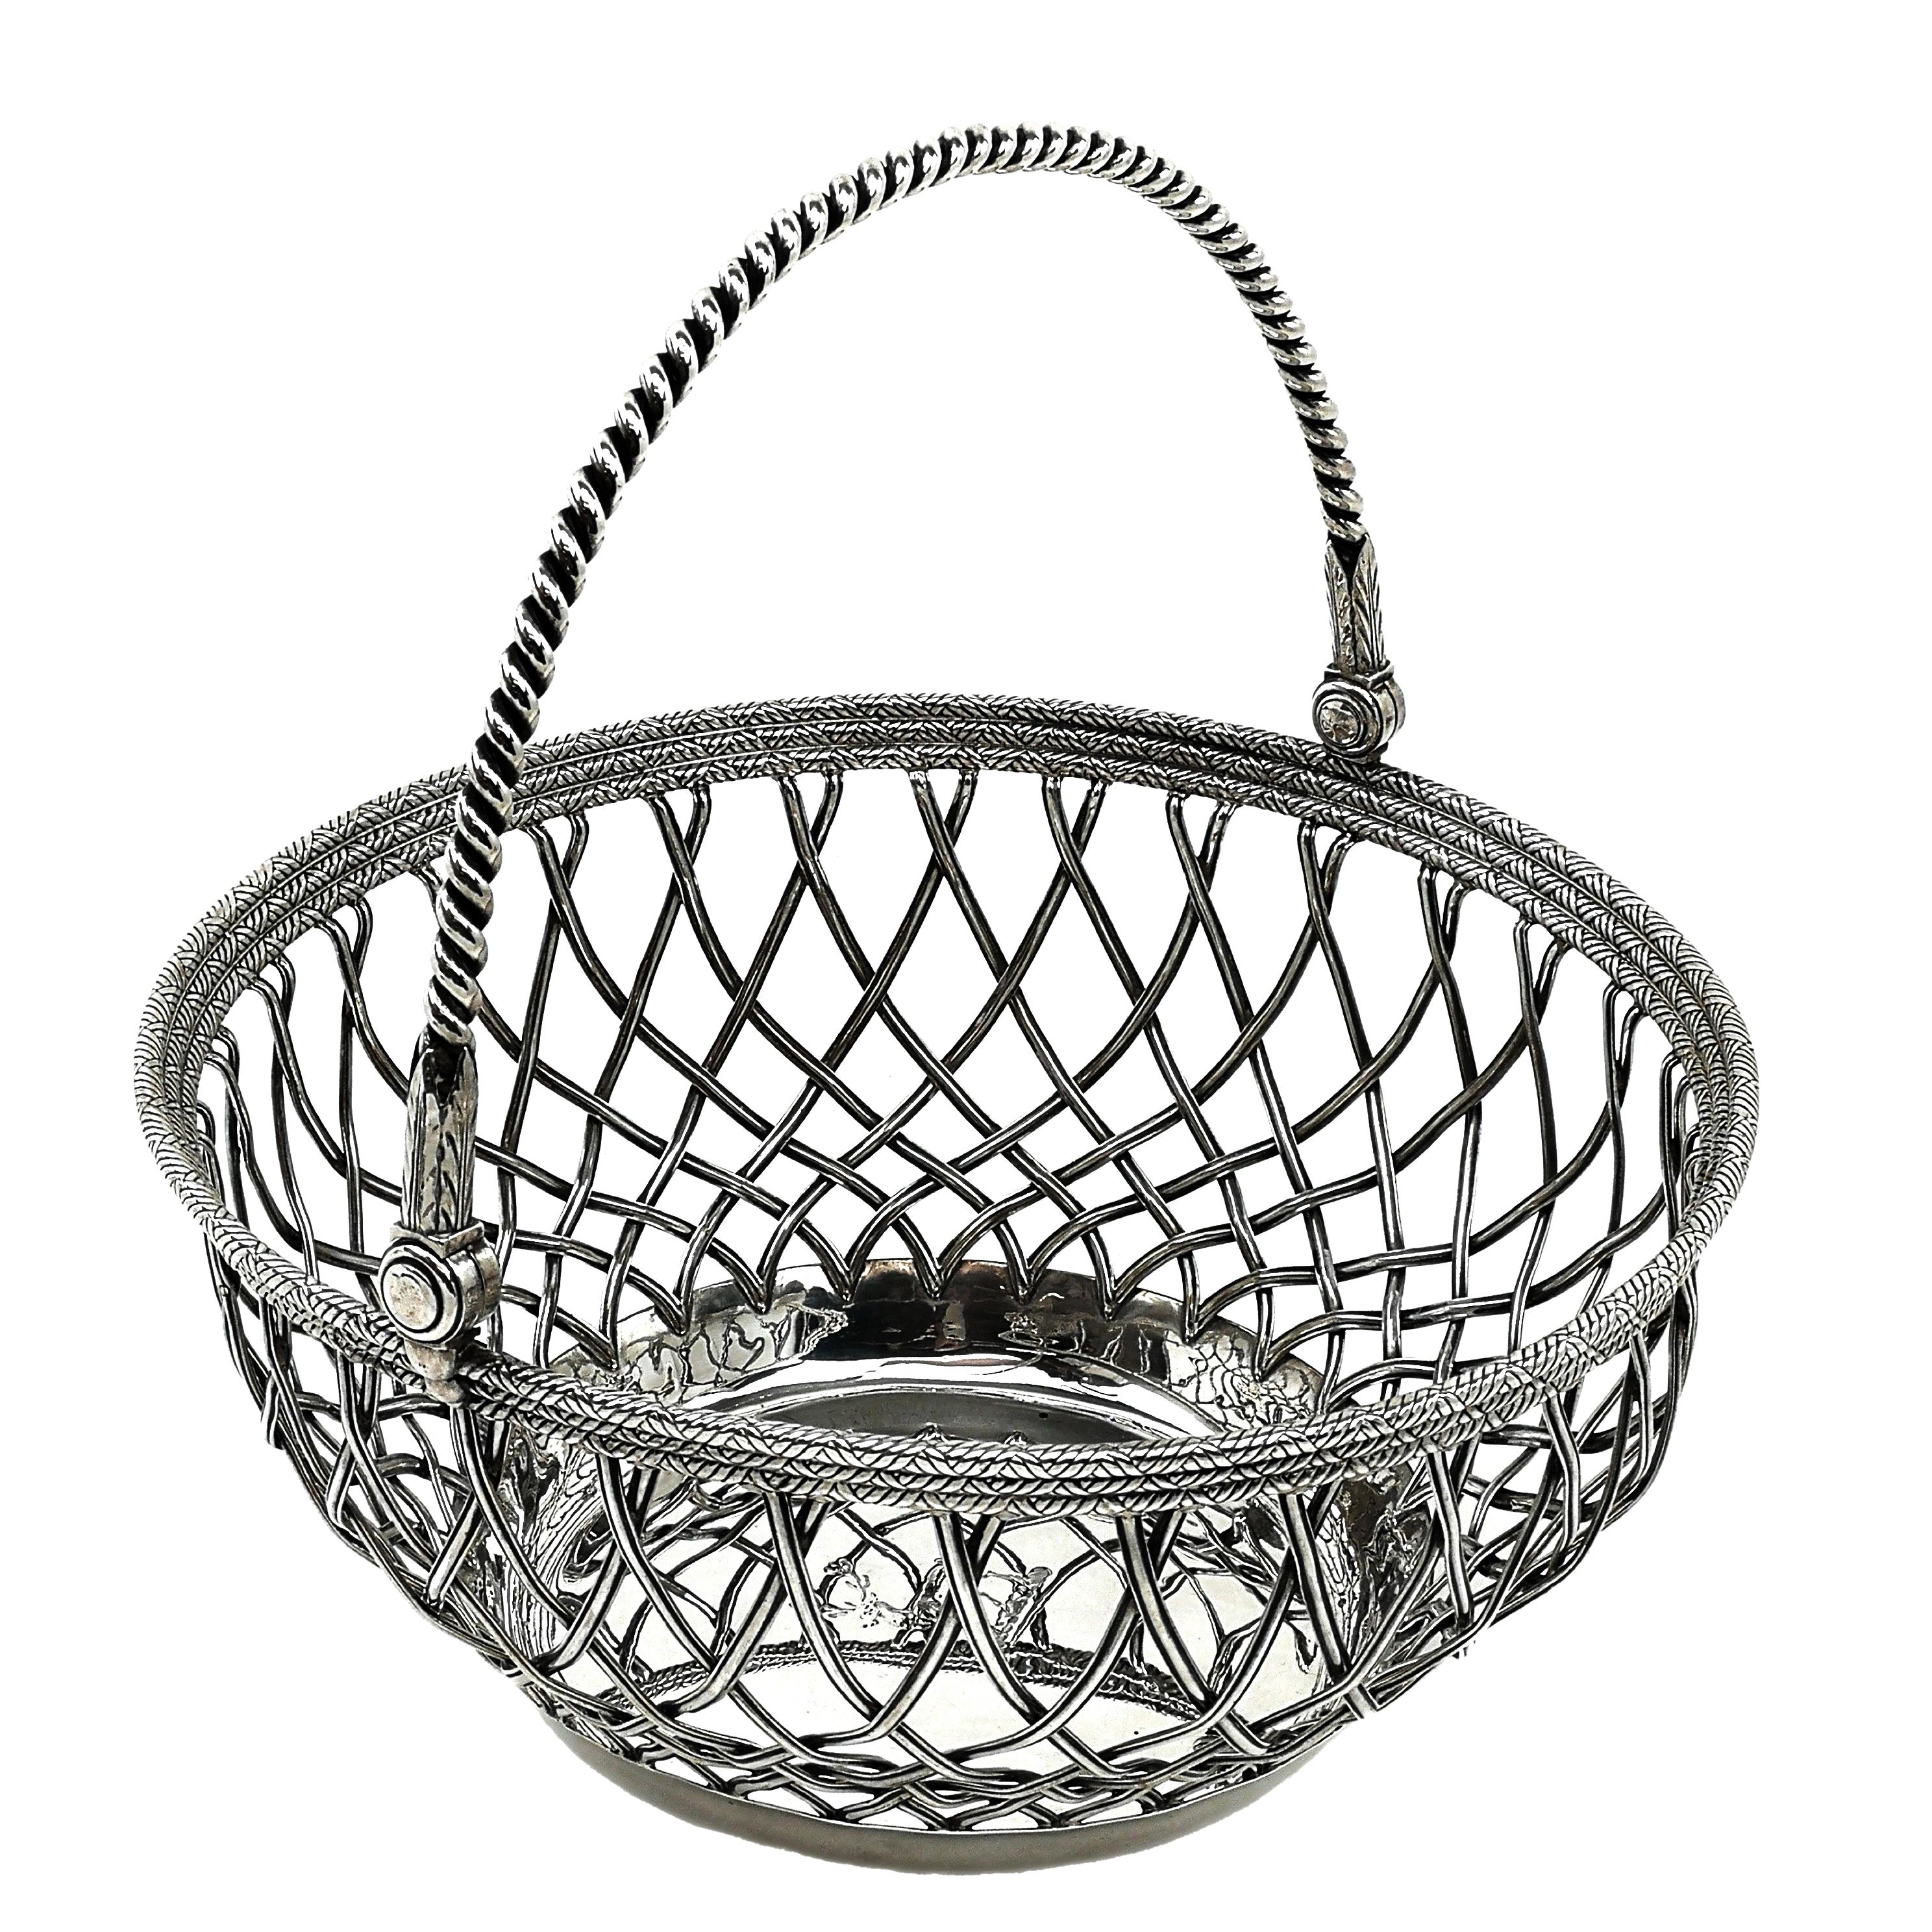 A magnificent George III Solid Silver Basket with a round form and a traditional swing handle. The Basket has a Solid Base and elegant sides created through silver wire work to mirror a basket weave. The Rim of the basket has cross hatches to